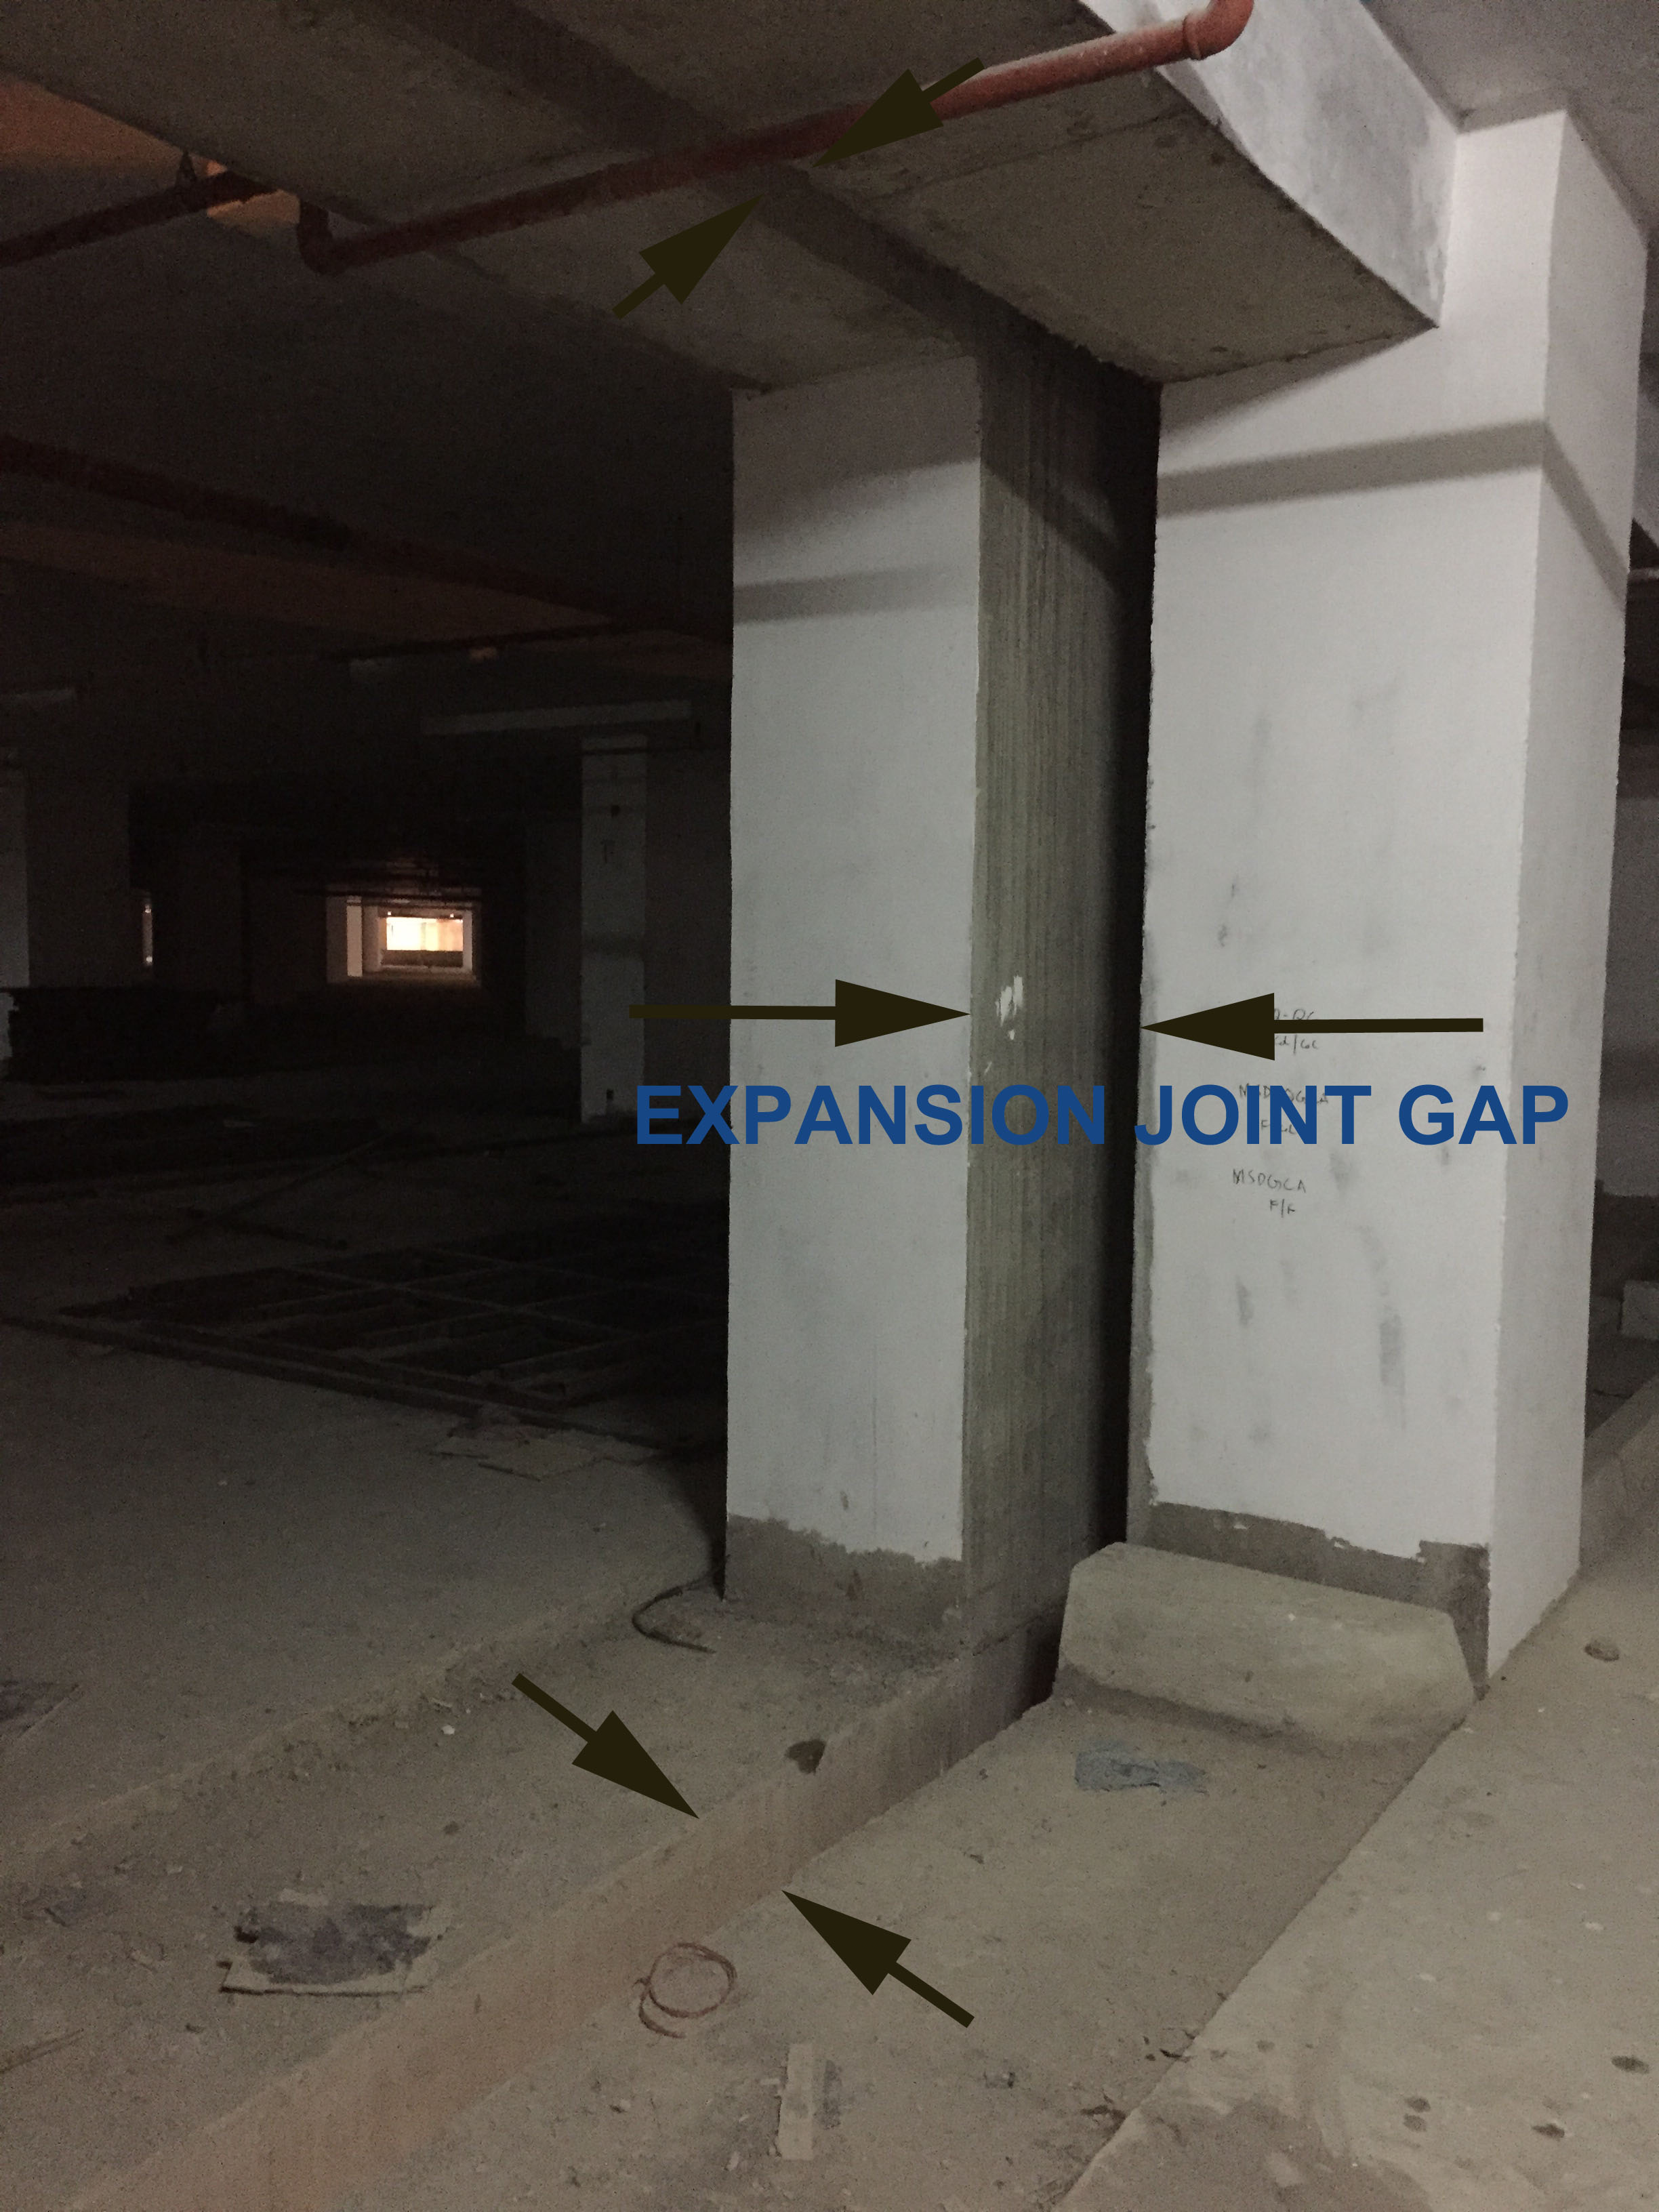 EXPANSION JOINT GAP